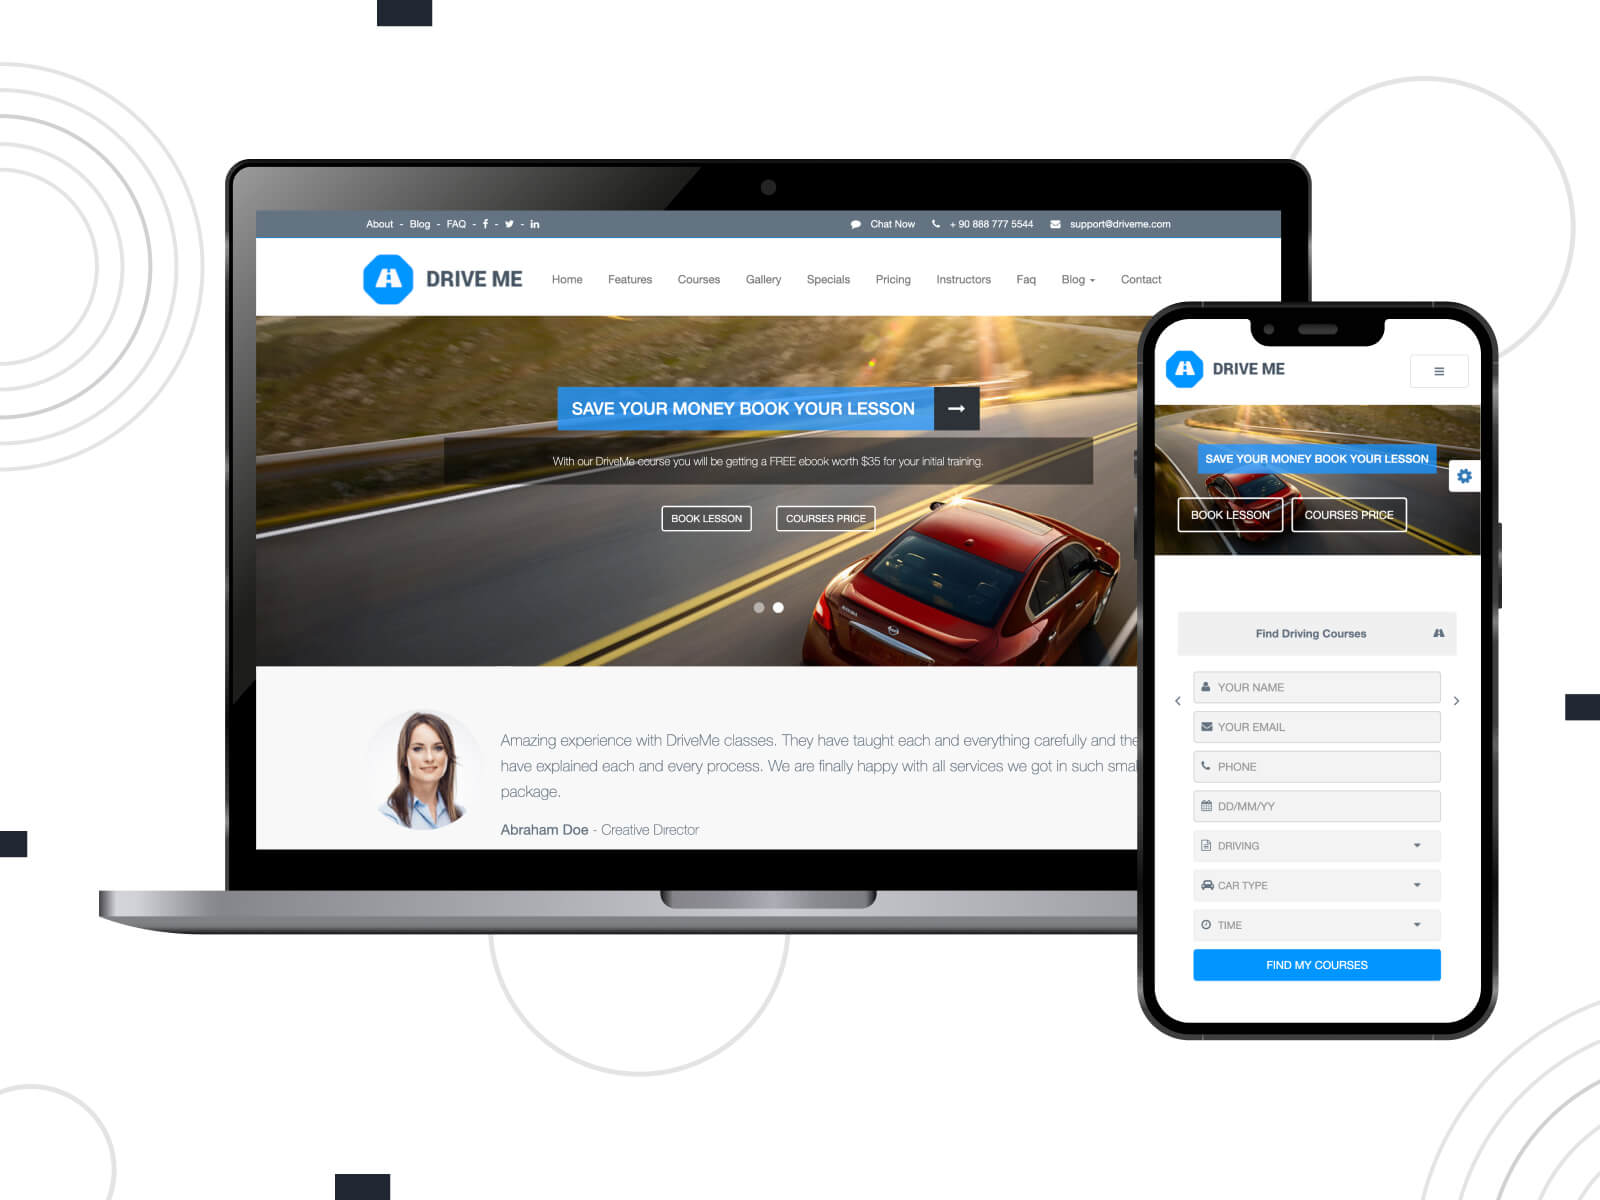 Picture of Driveme - bright, inviting, known for its high customization options, this theme is rated as one of the top driving school WordPress themes for personalized site designs, in corn flowerblue, gray, and dark olive green color palette.